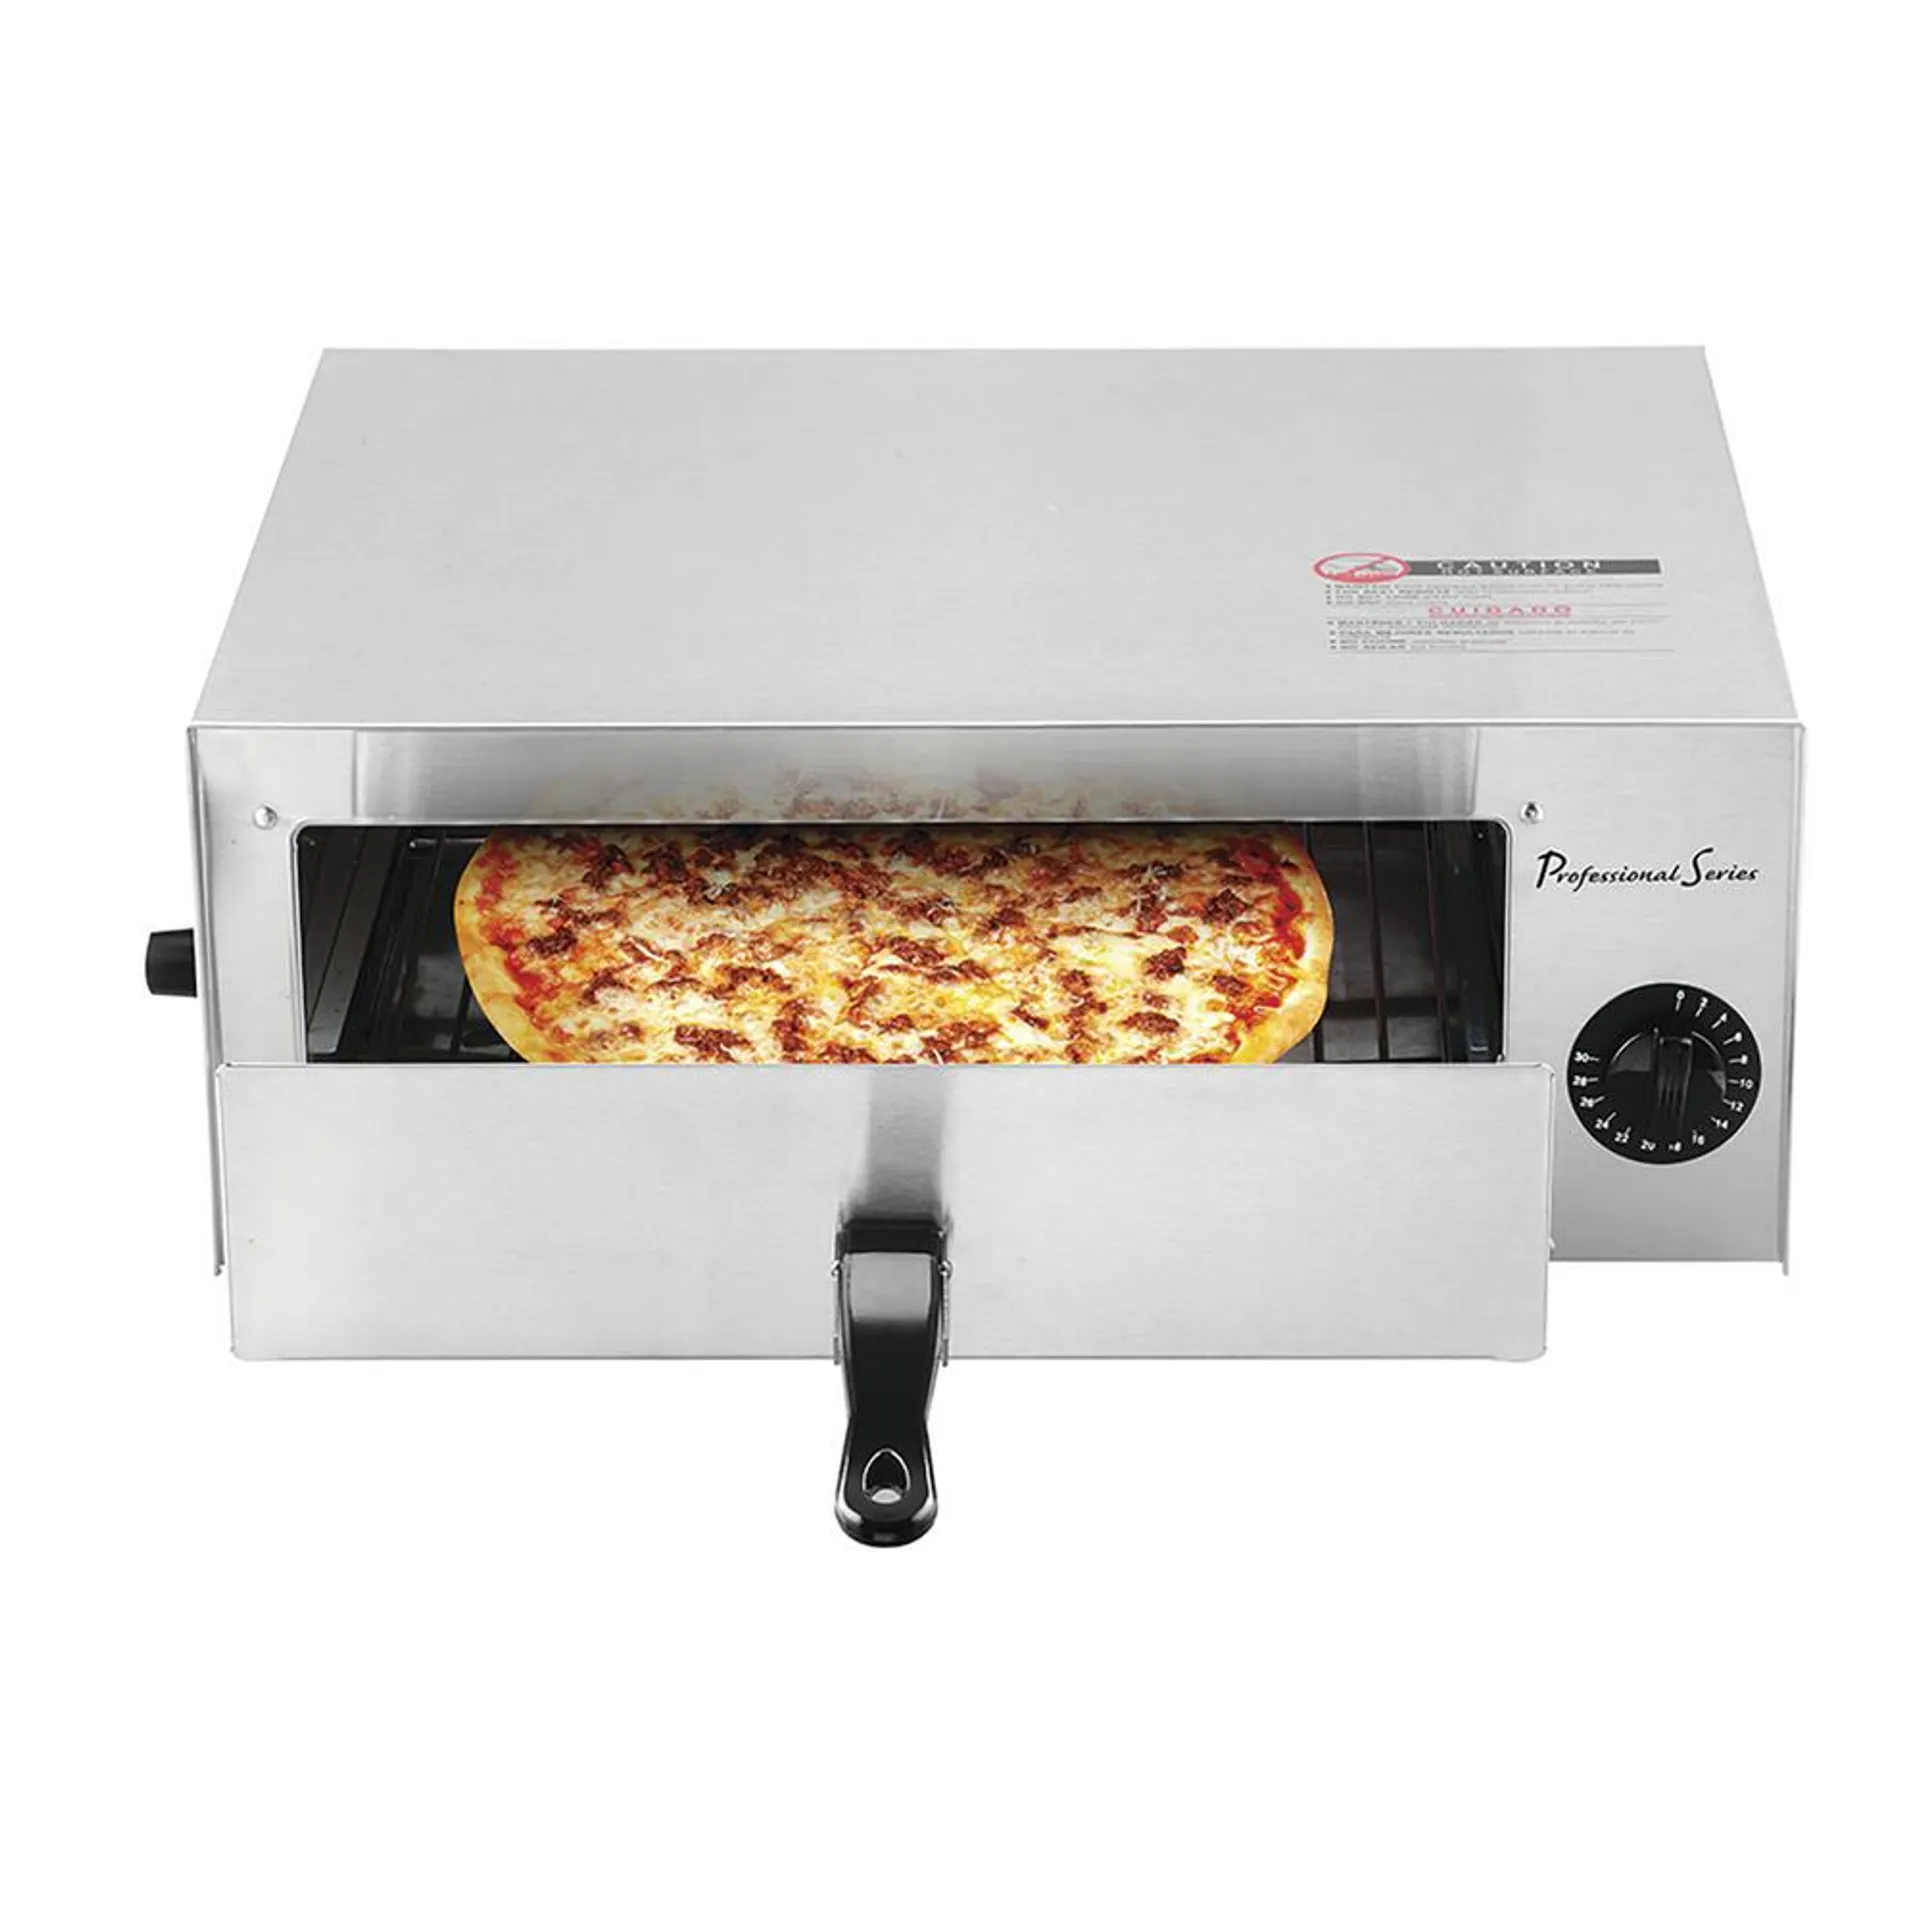 Professional Series® 12" Wide Stainless Steel Pizza Oven